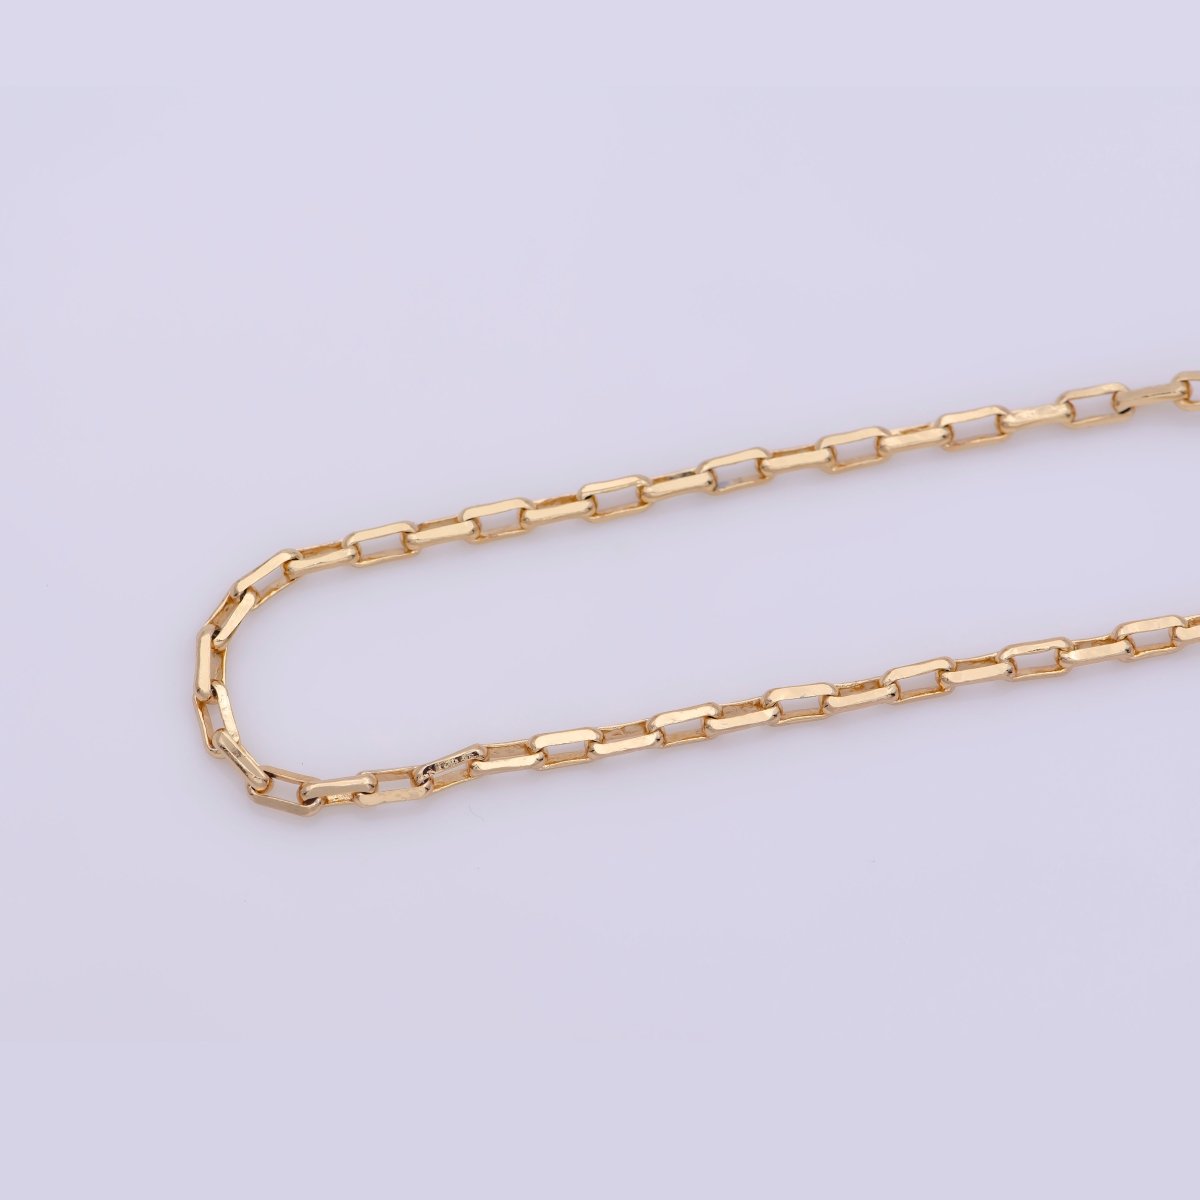 18K Gold Filled Cable Chain Necklace, 19.6 inch Cable Finished Chain For Jewelry Necklace Making, Dainty 2.5mm Cable Necklace w/ Lobster Clasps | CN-737 - DLUXCA